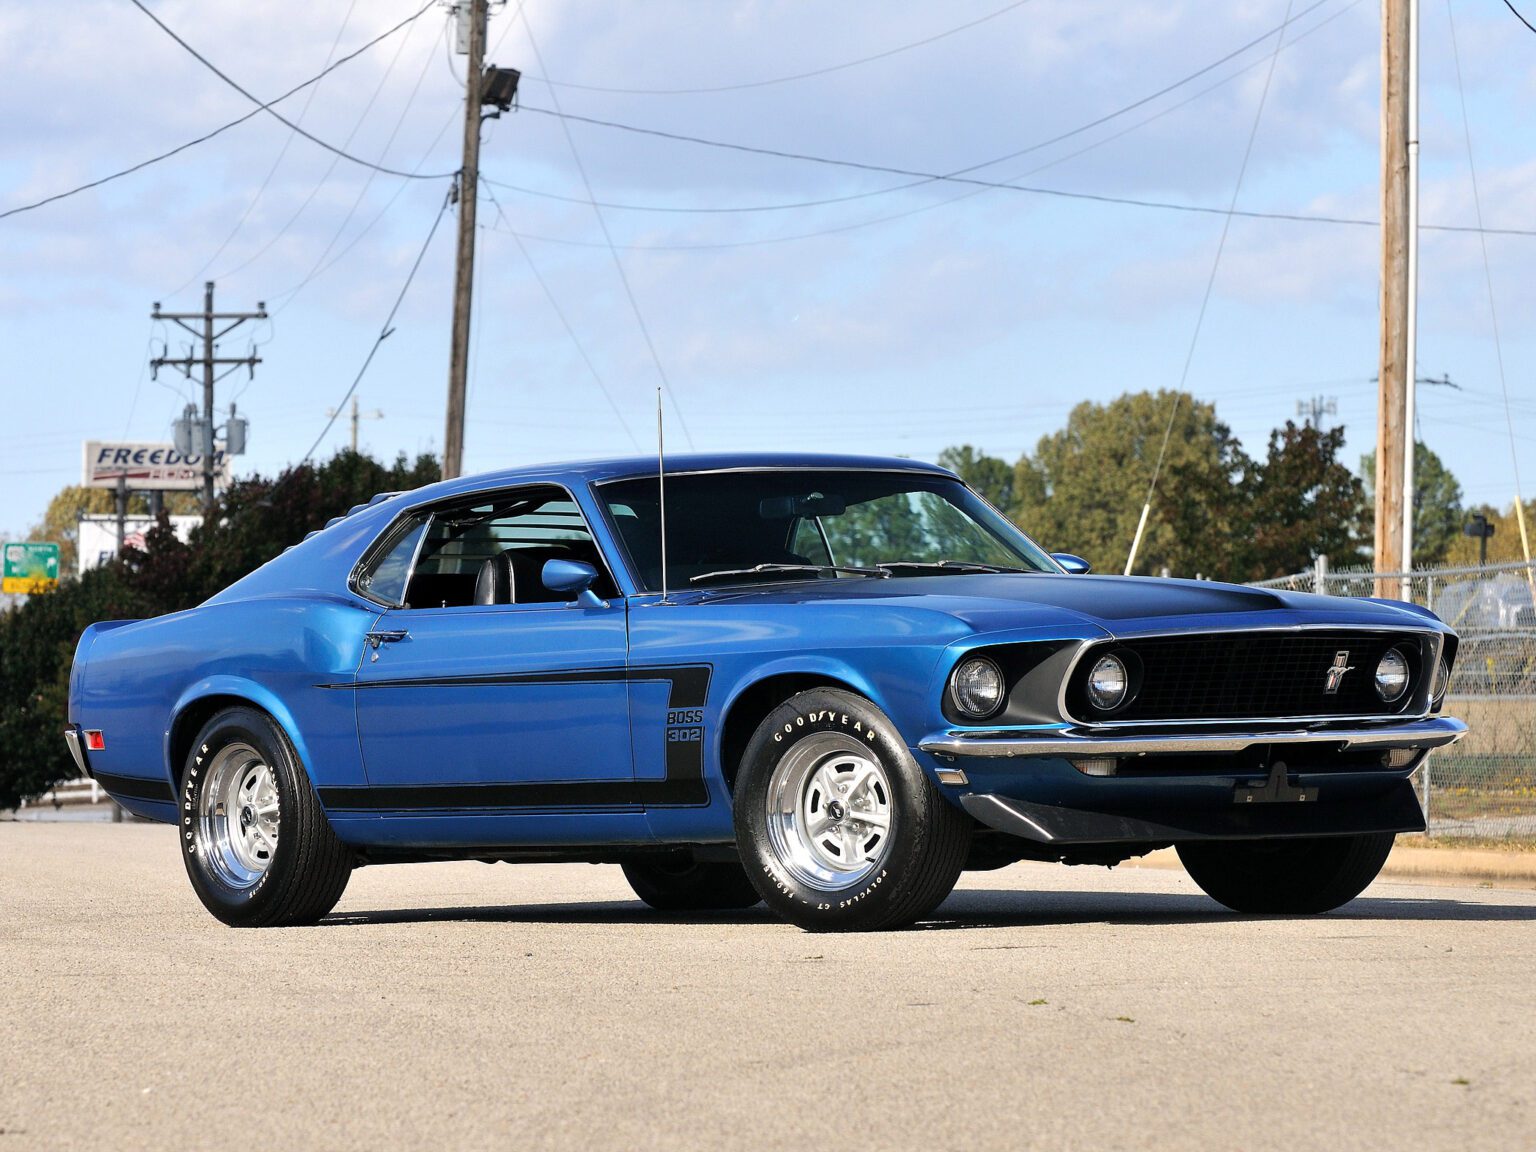 1969 Ford Mustang Boss 302 Wallpapers | SuperCars.net